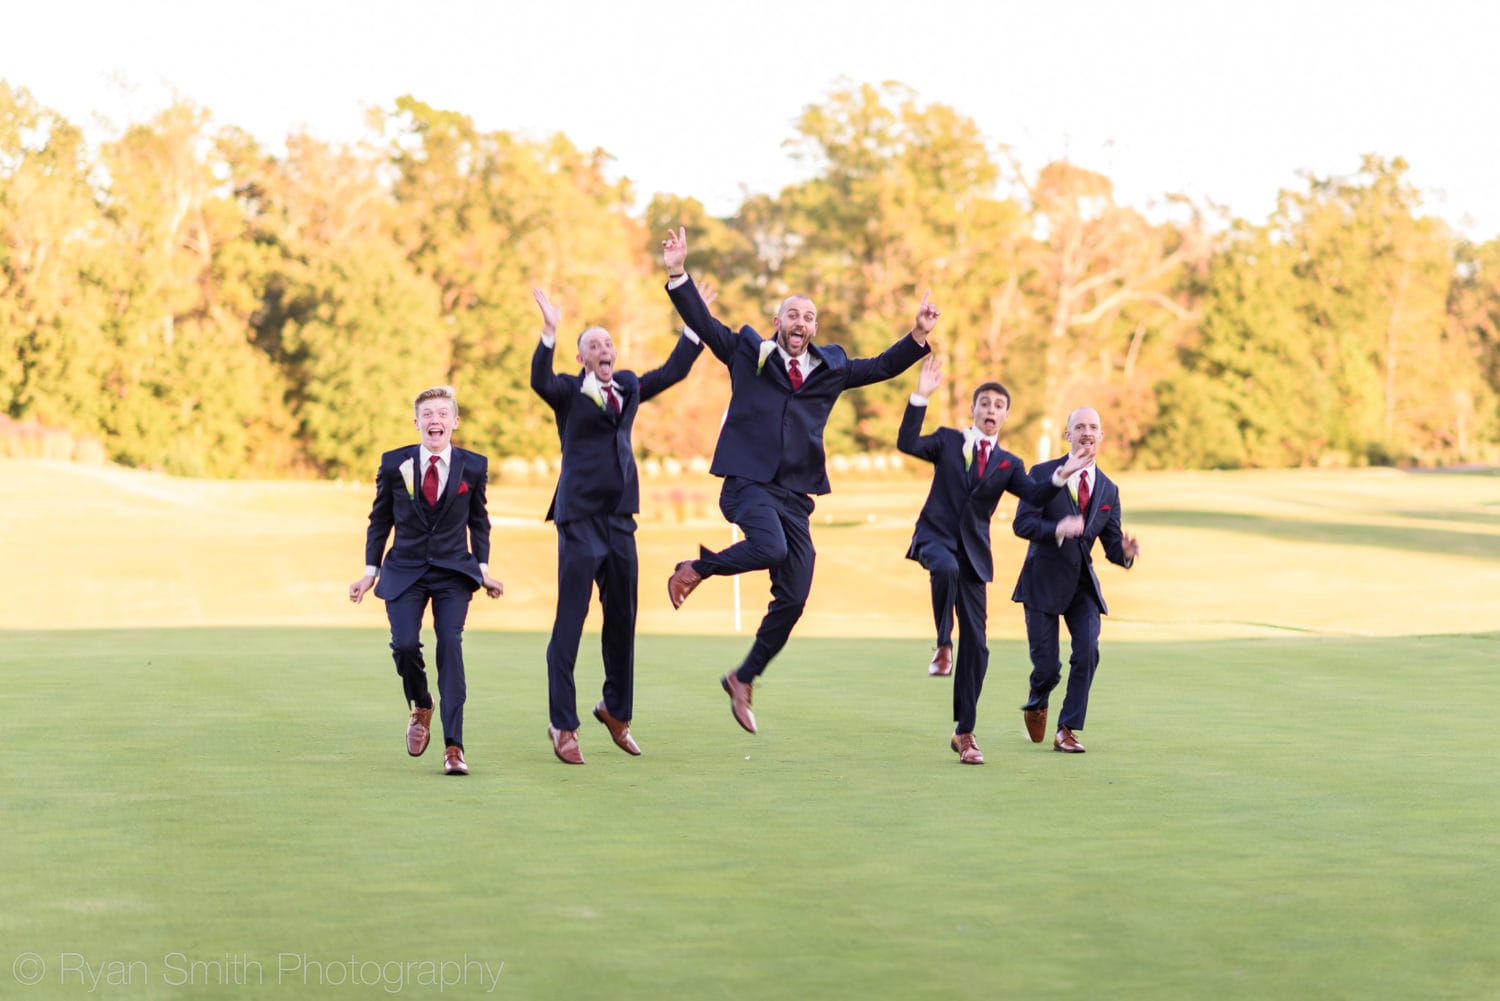 Groom with his sons jumping into the air - Members Club - Grande Dunes